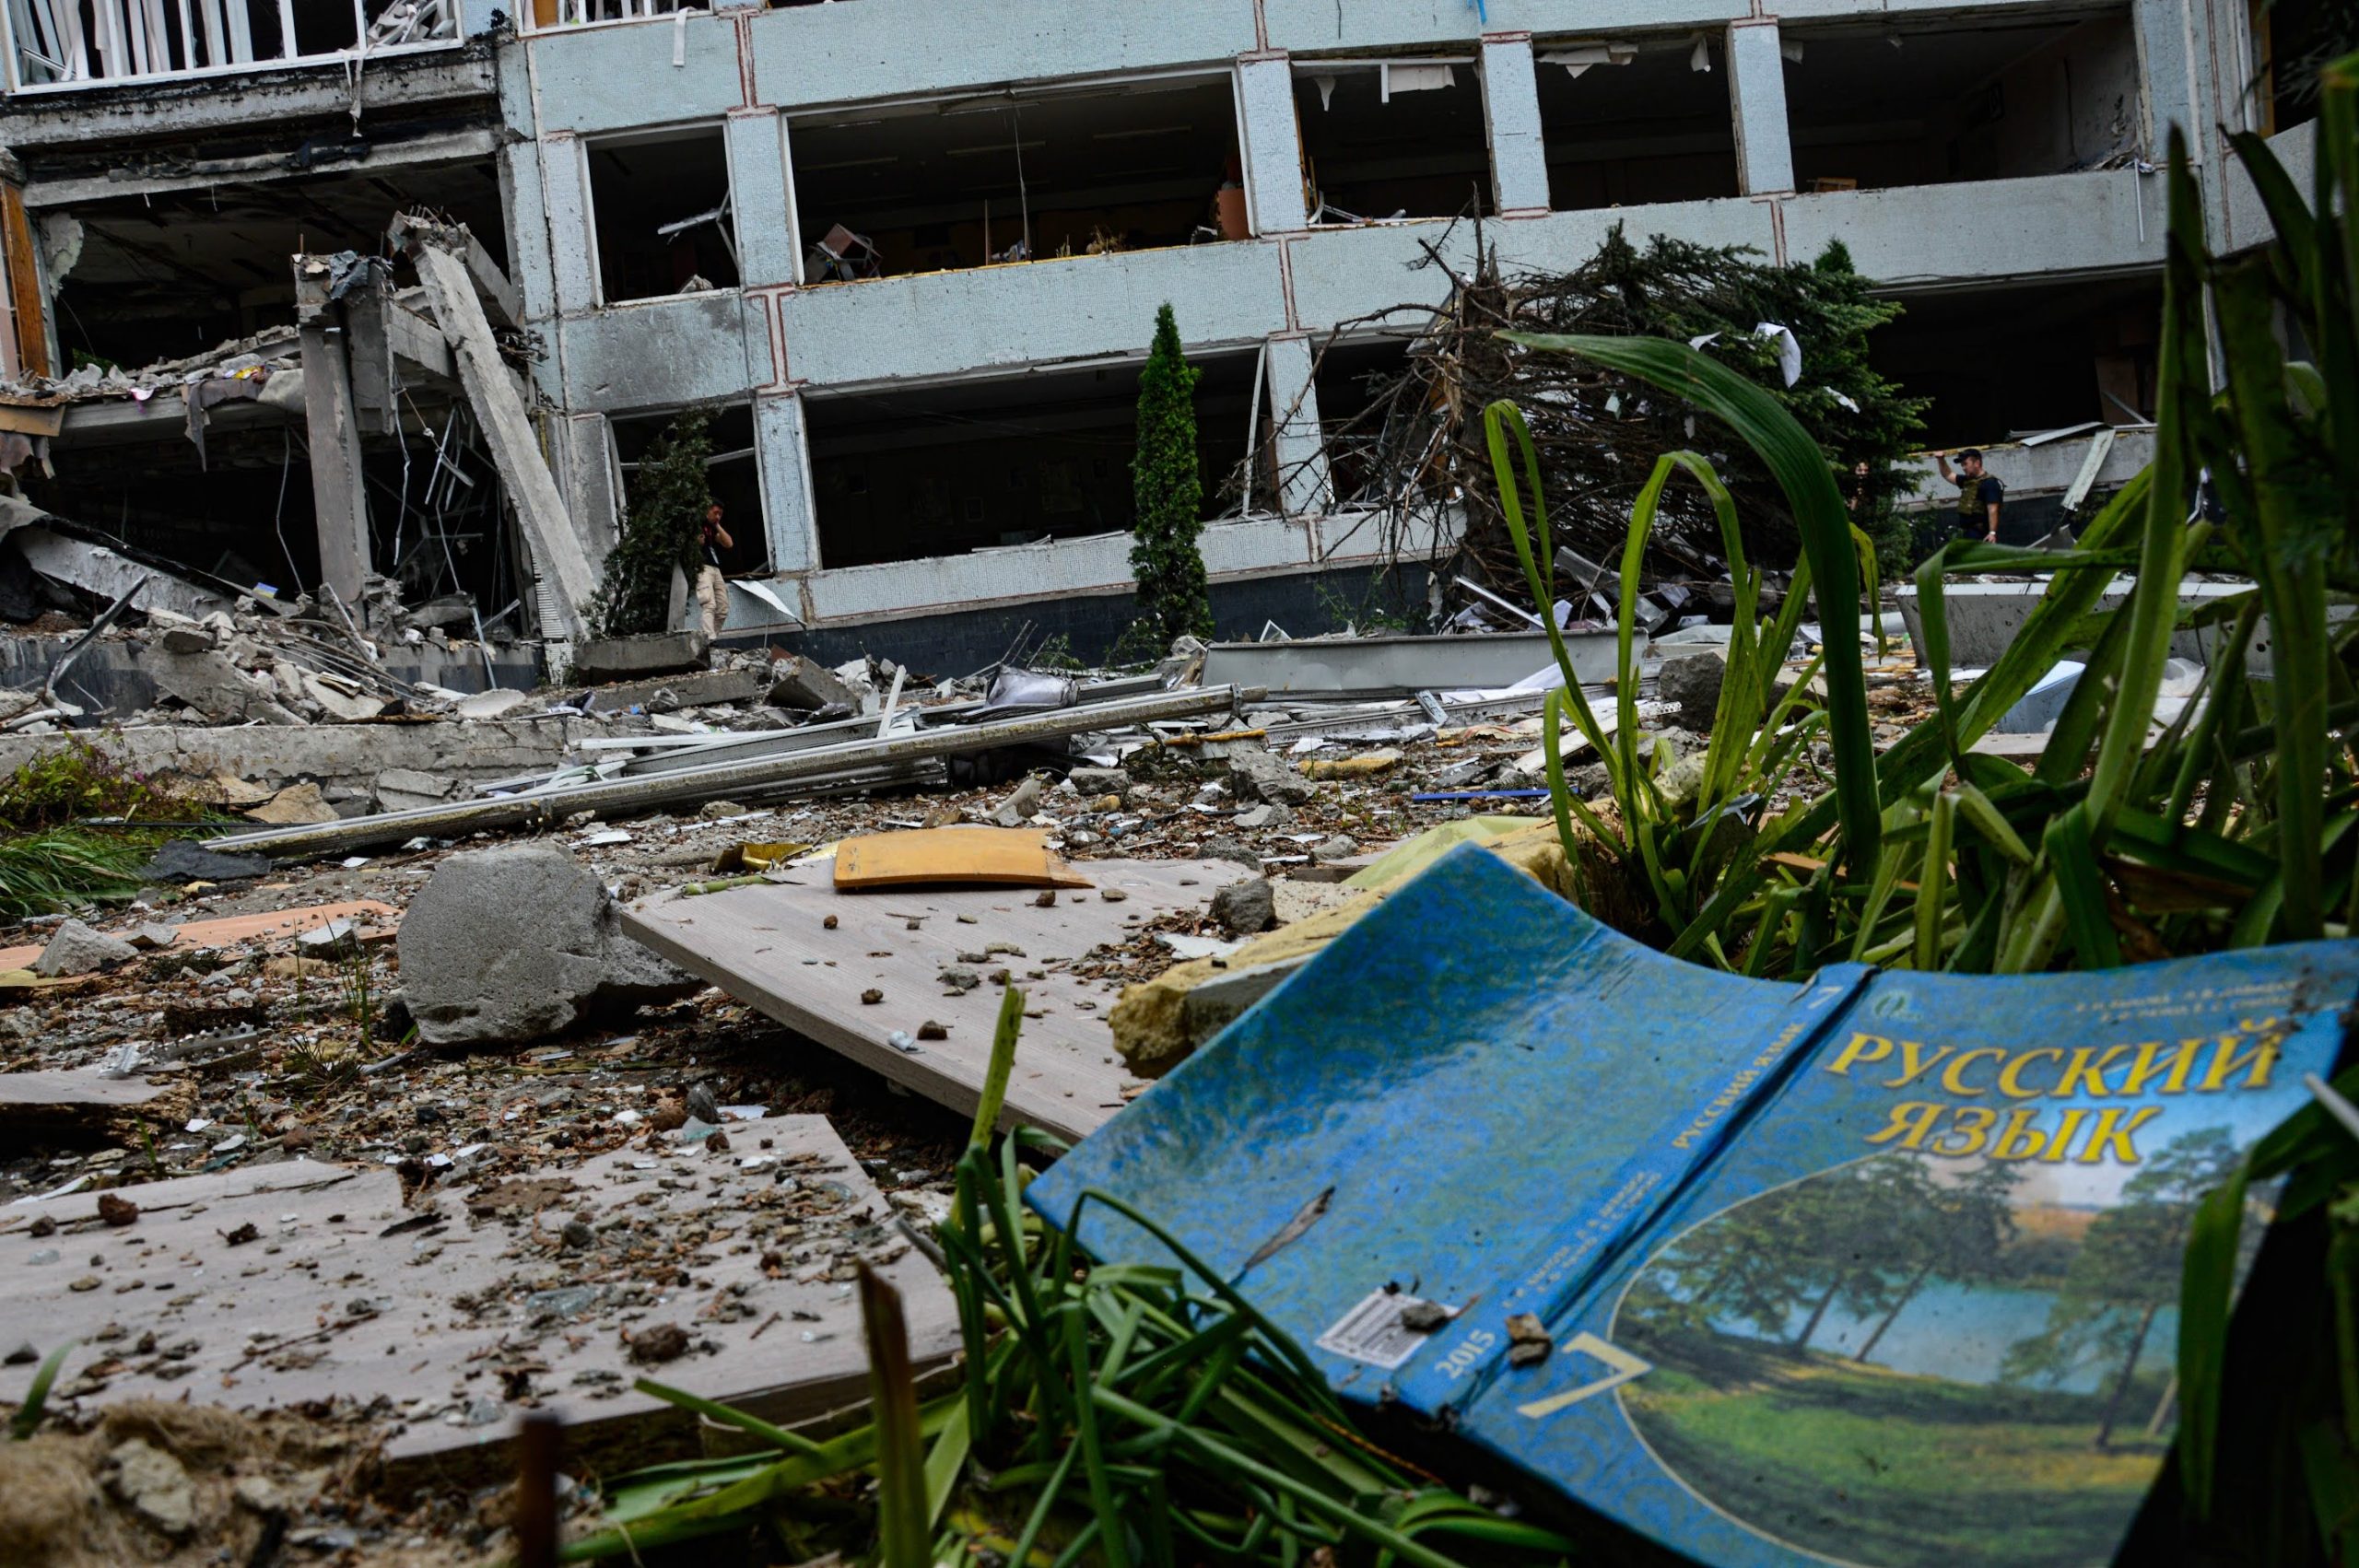 Kharkiv Specialized School No. 17 was damaged by Russian attacks in 2022. Photo was taken on June 03, 2022 by Yuliia Hush.